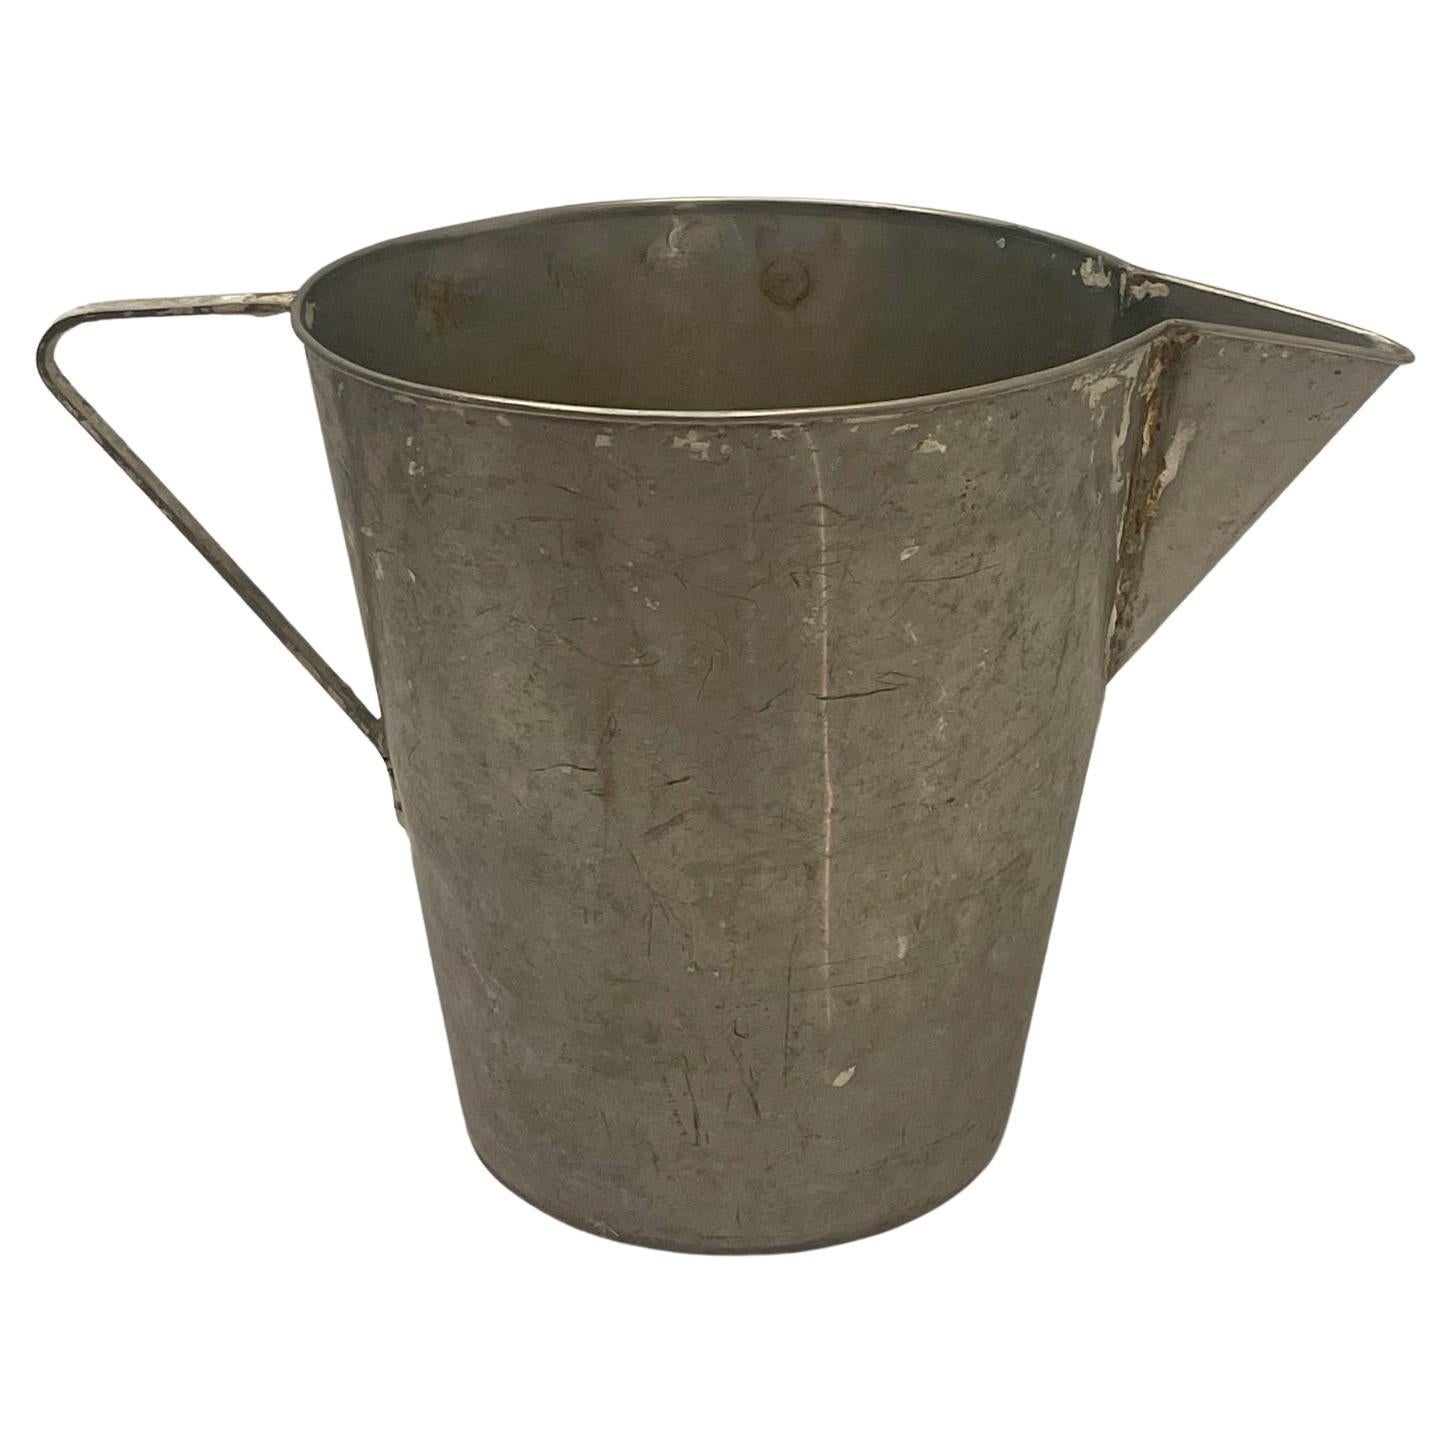 Very Large Industrial Stainless Steel Pitcher Planter